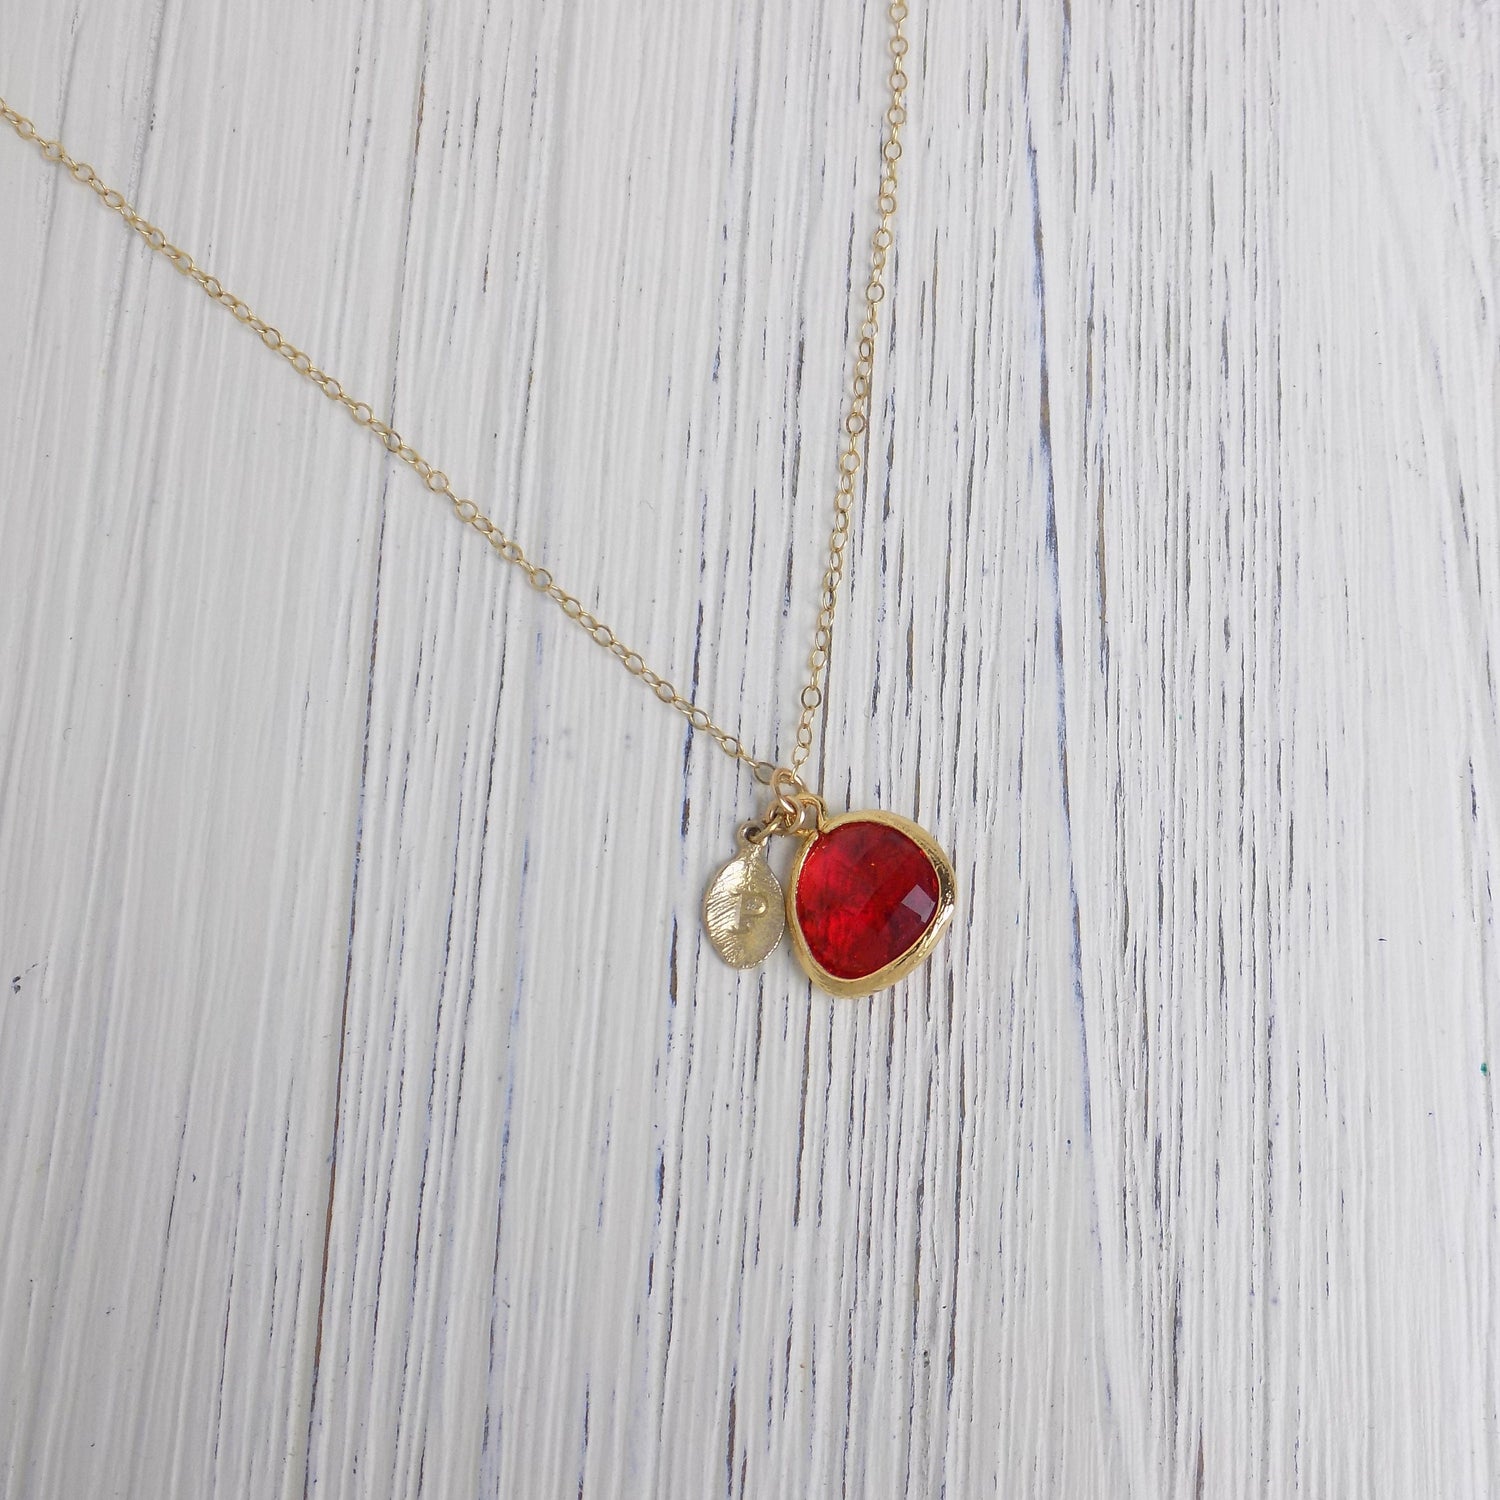 Personalized Red Crystal Quartz Necklace With 14K Gold Filled Chain, Custom Christmas Gift For Mom, Hand Stamped Initial Charm, M6-702